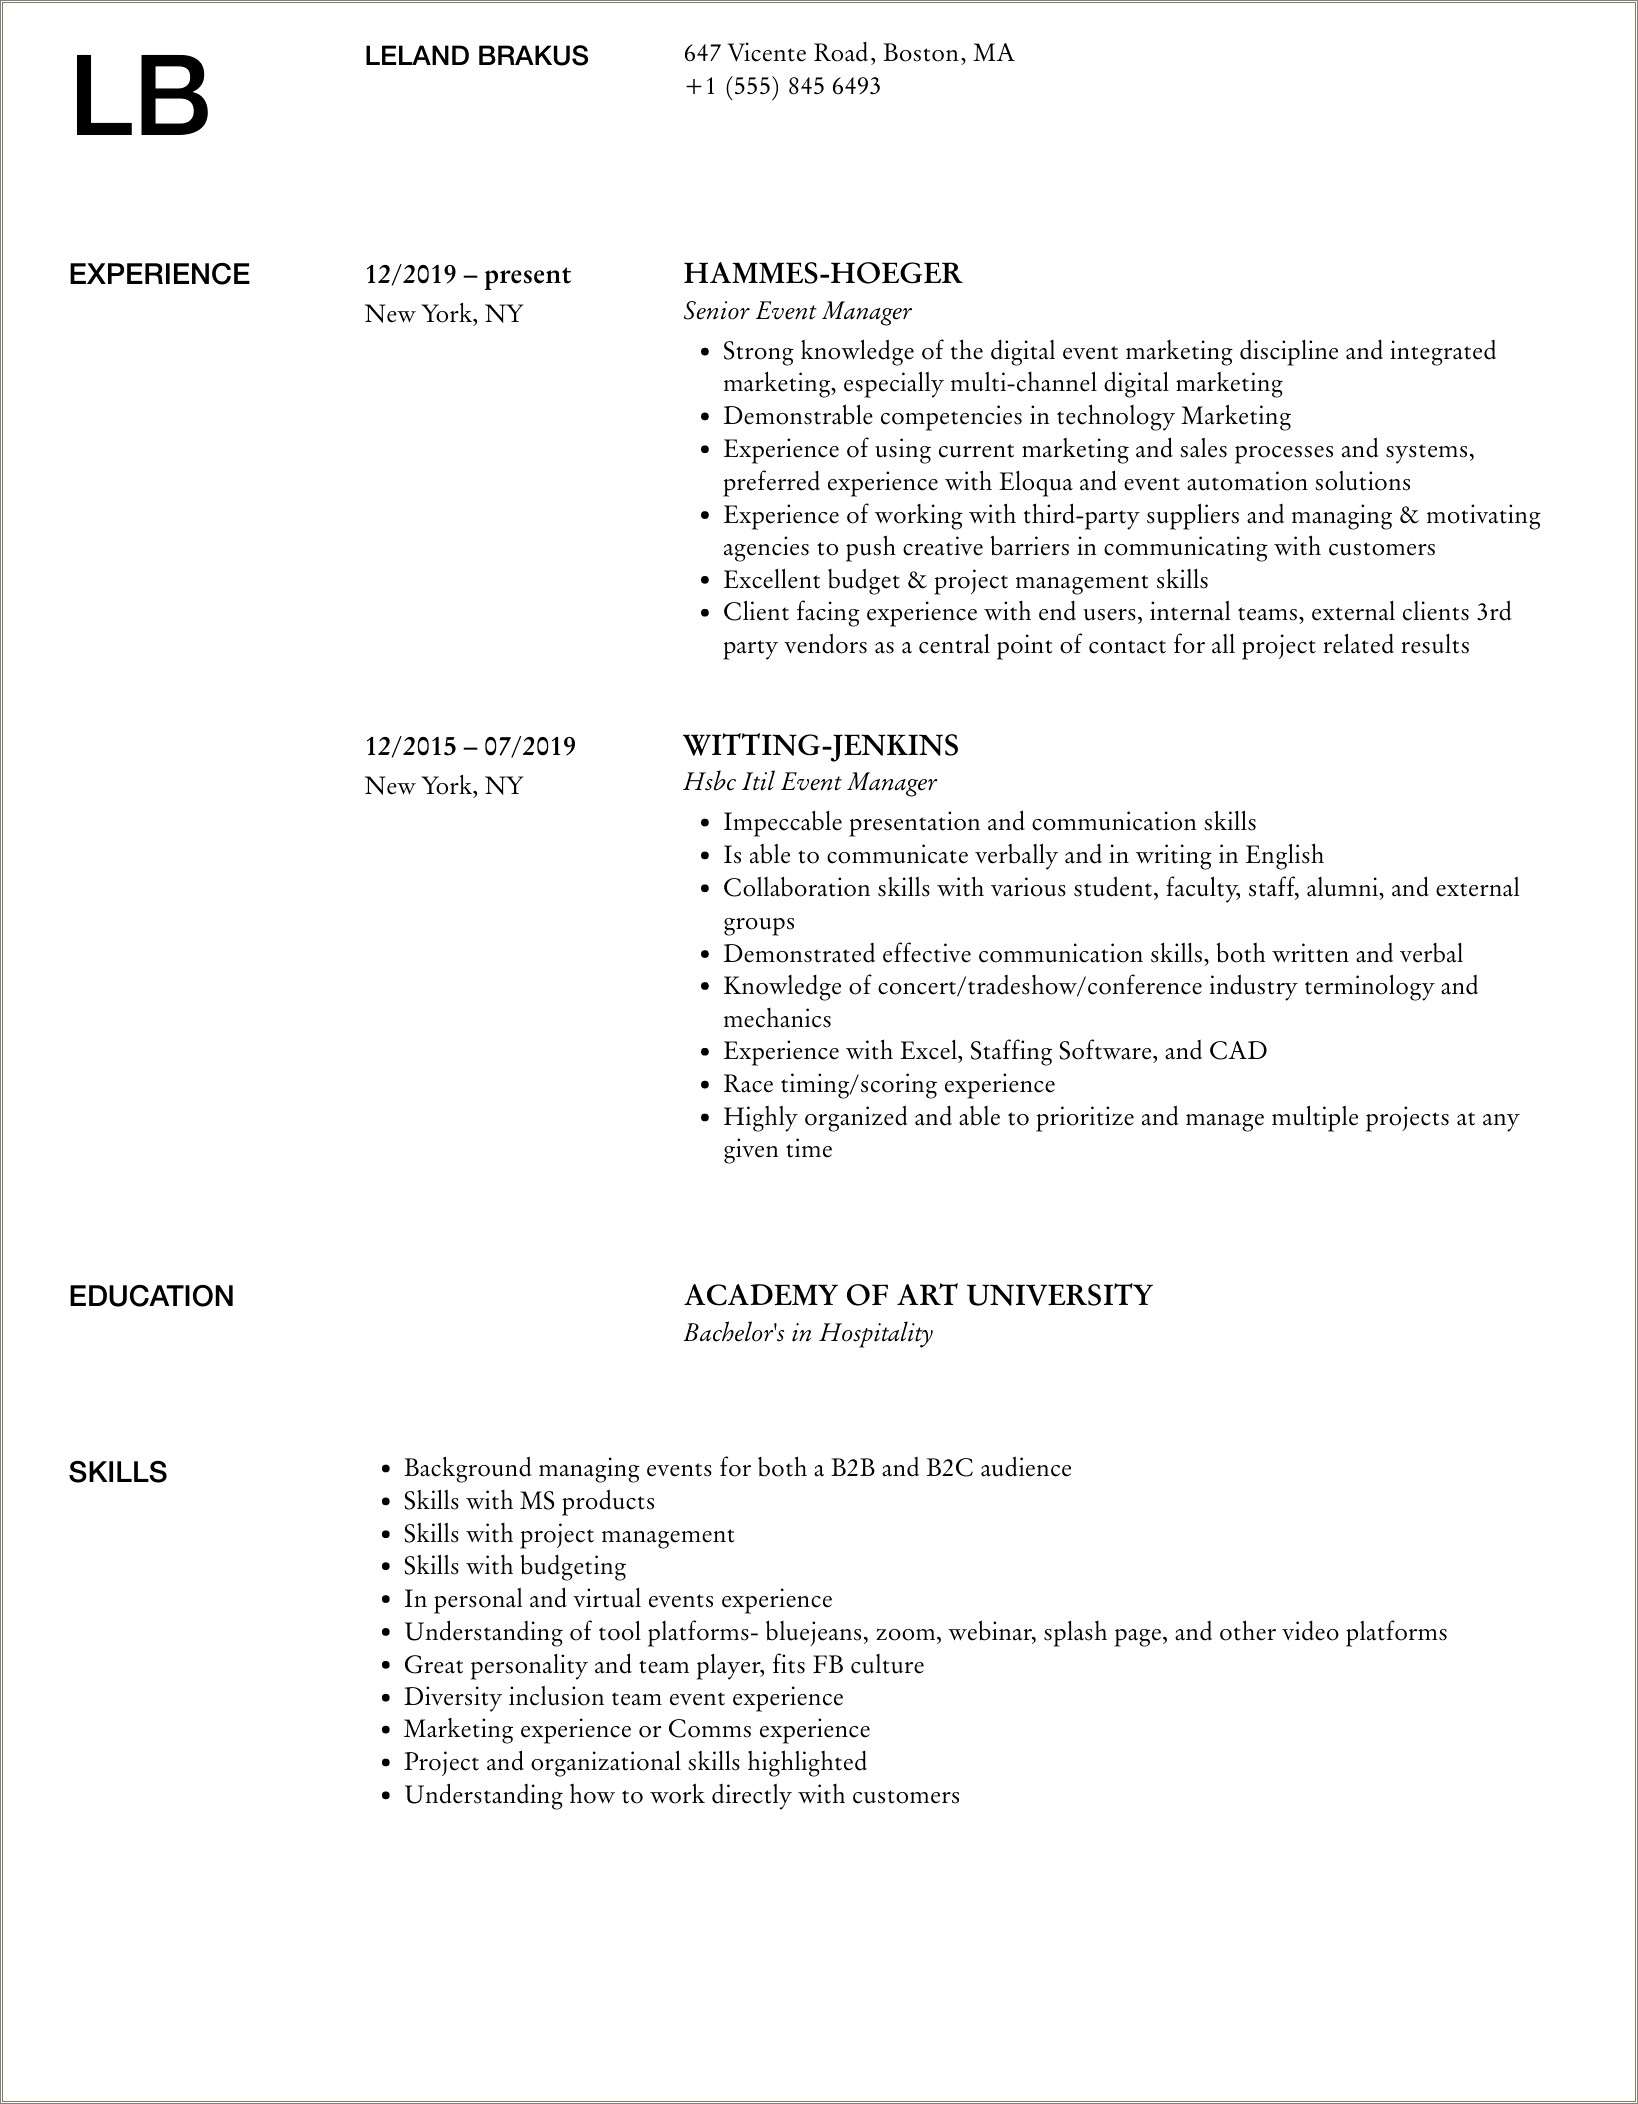 Resume 2019 Skills For Event Specialist